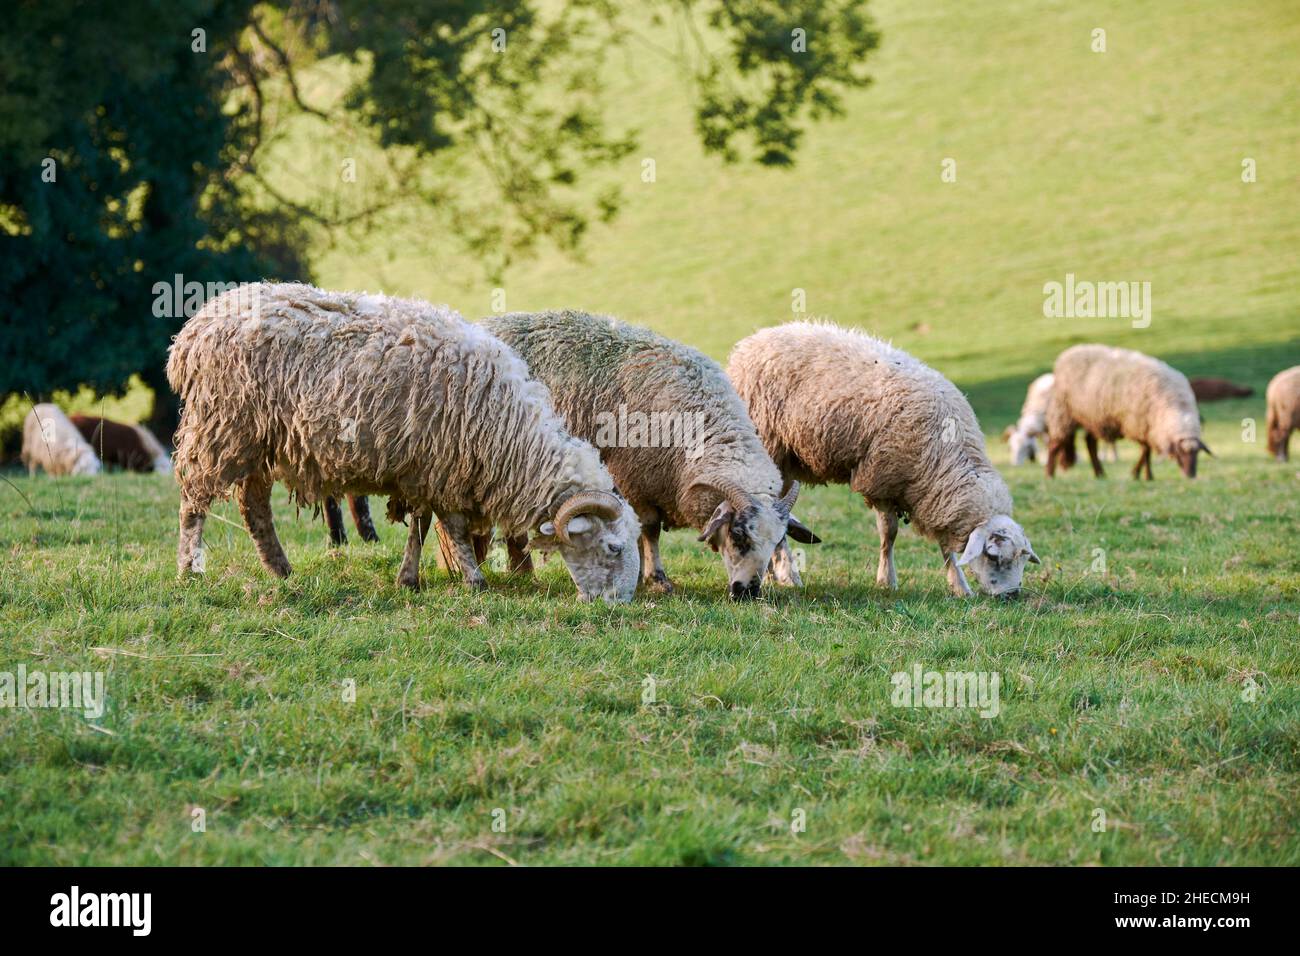 France, Pyrenees Atlantiques, Bearn, Lys, Sheep on pasture Stock Photo